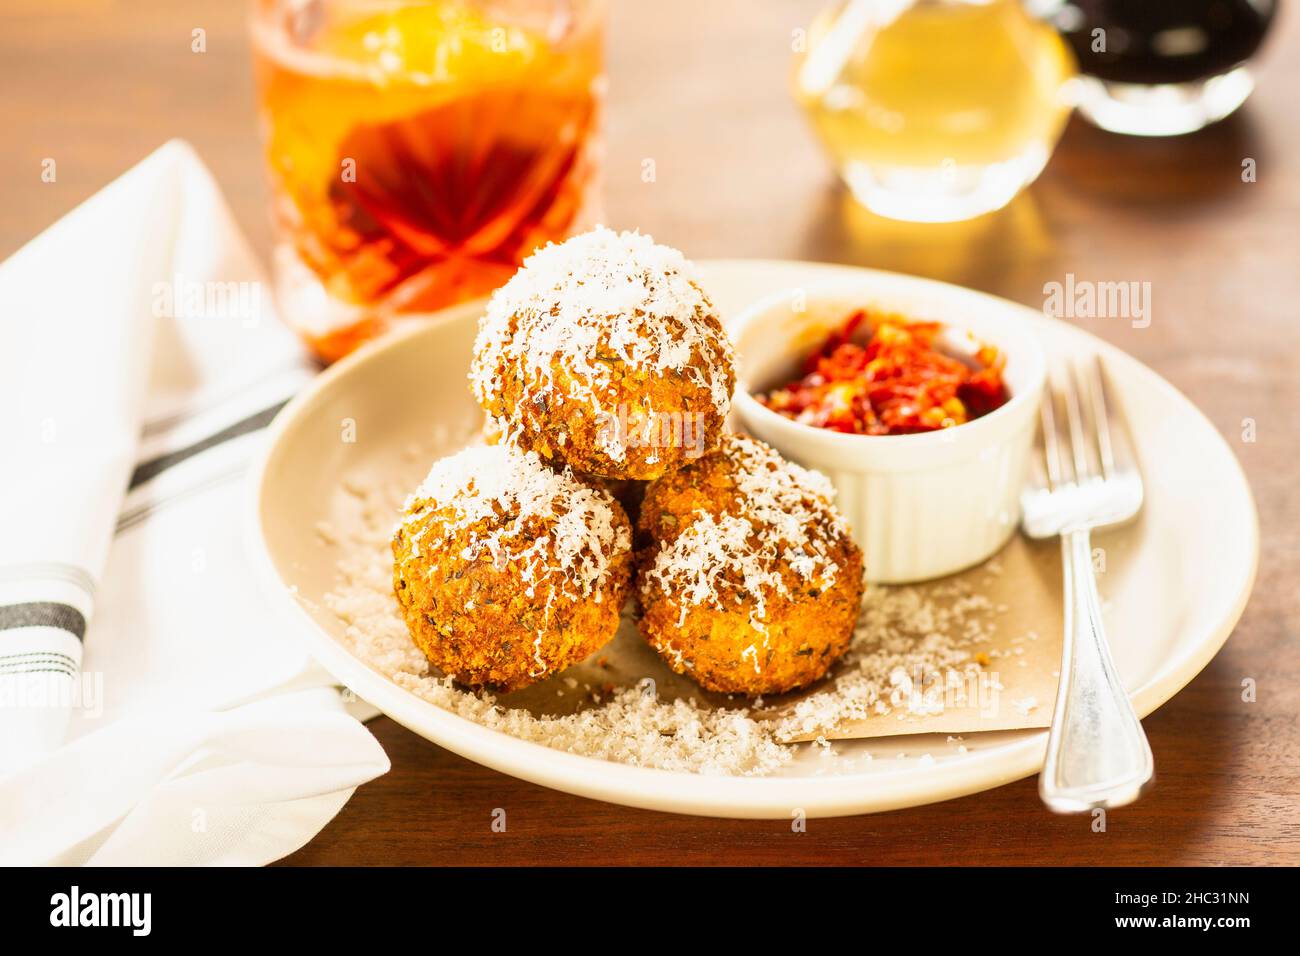 fried risotto balls and a negroni cocktail Stock Photo